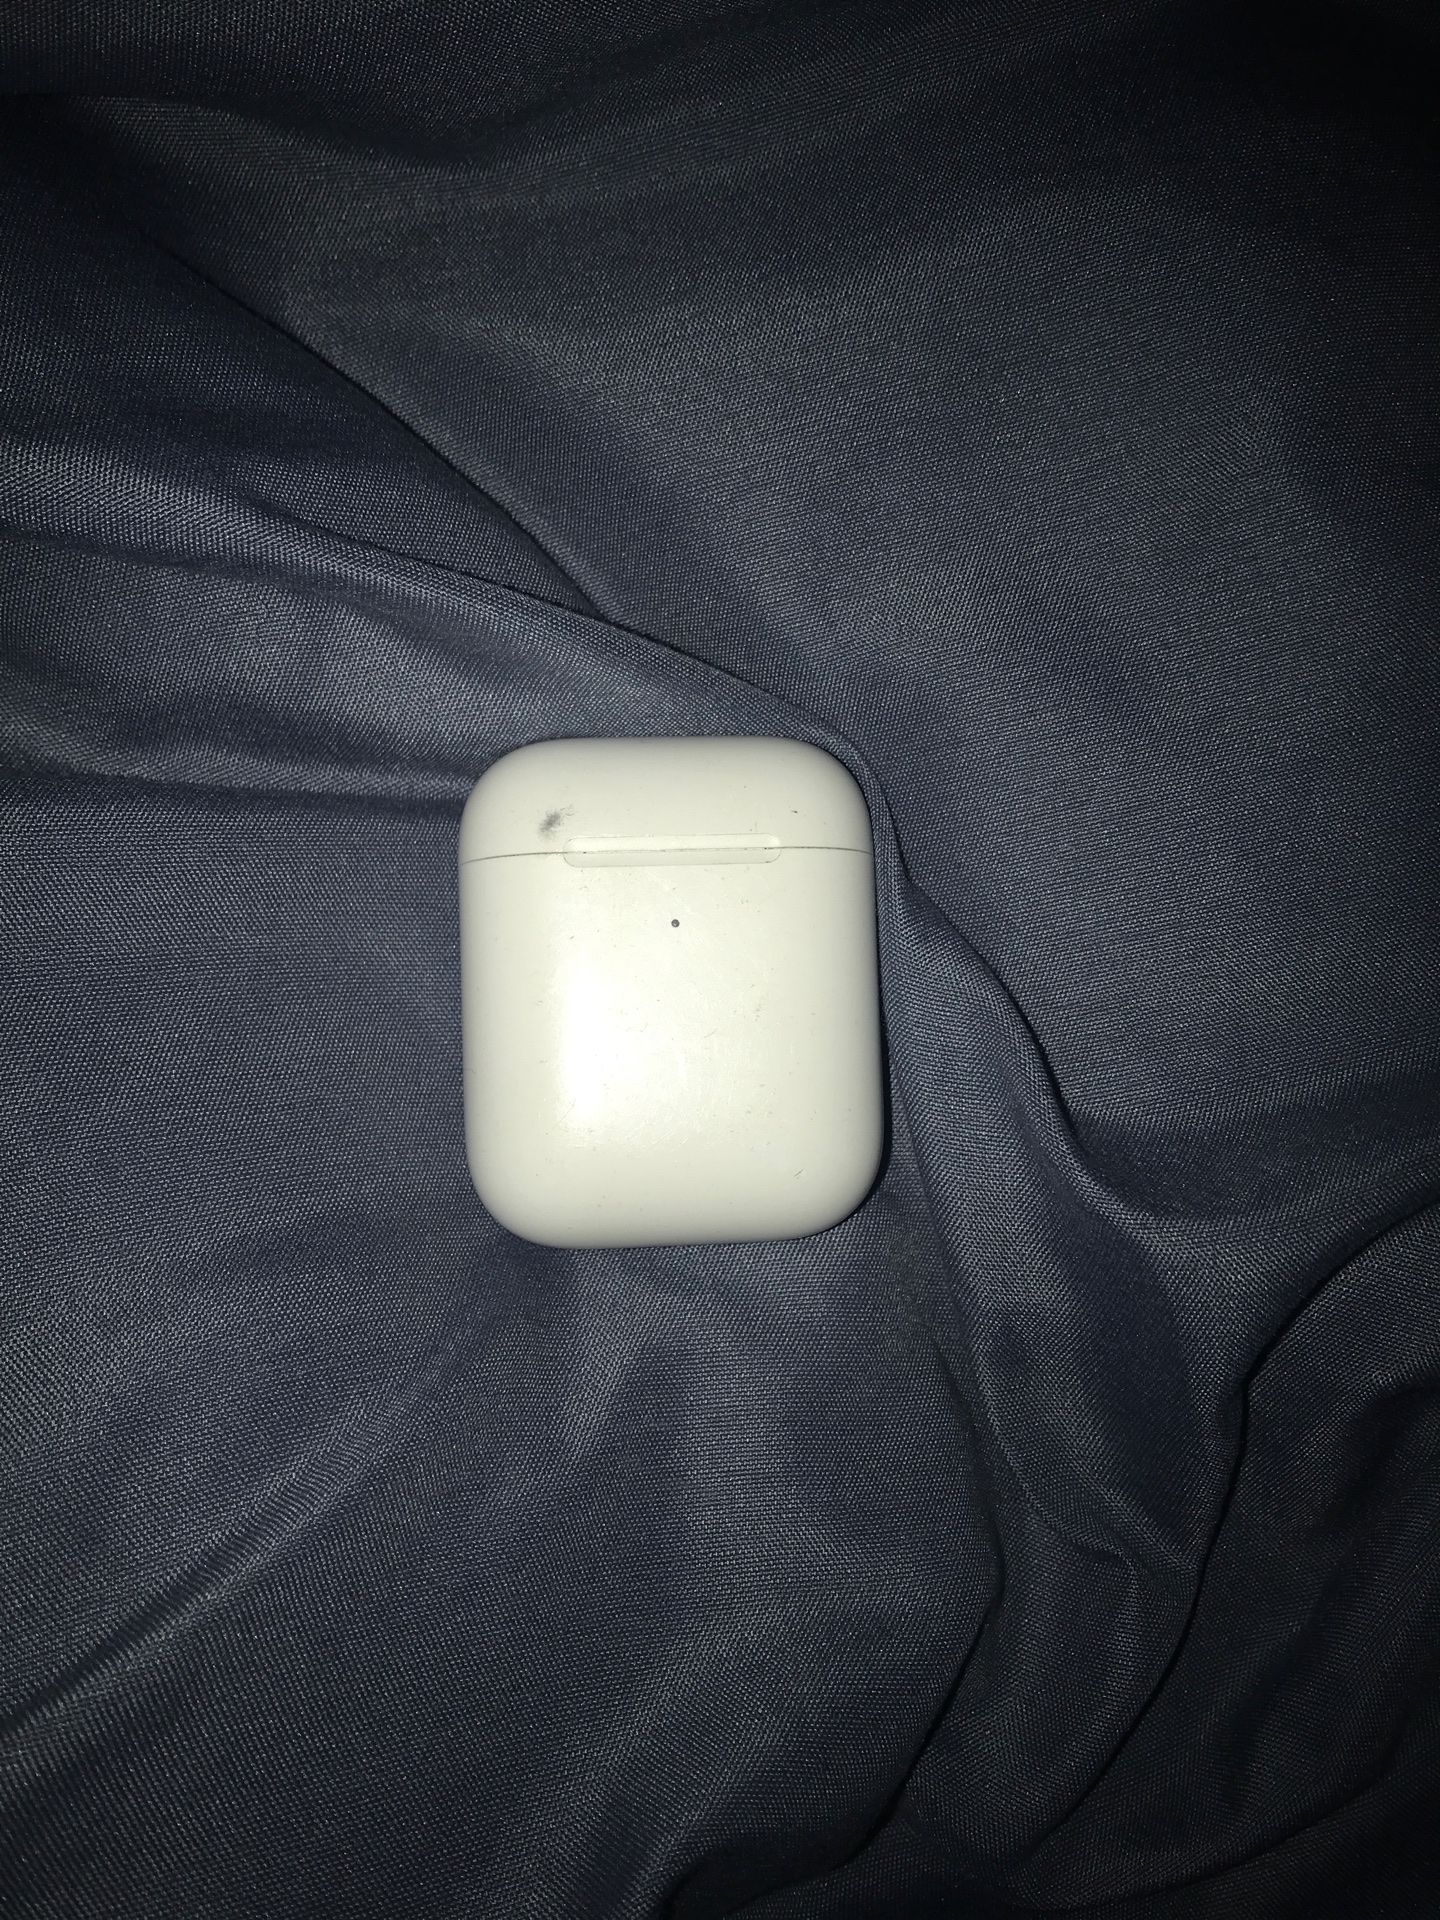 AirPod charger only